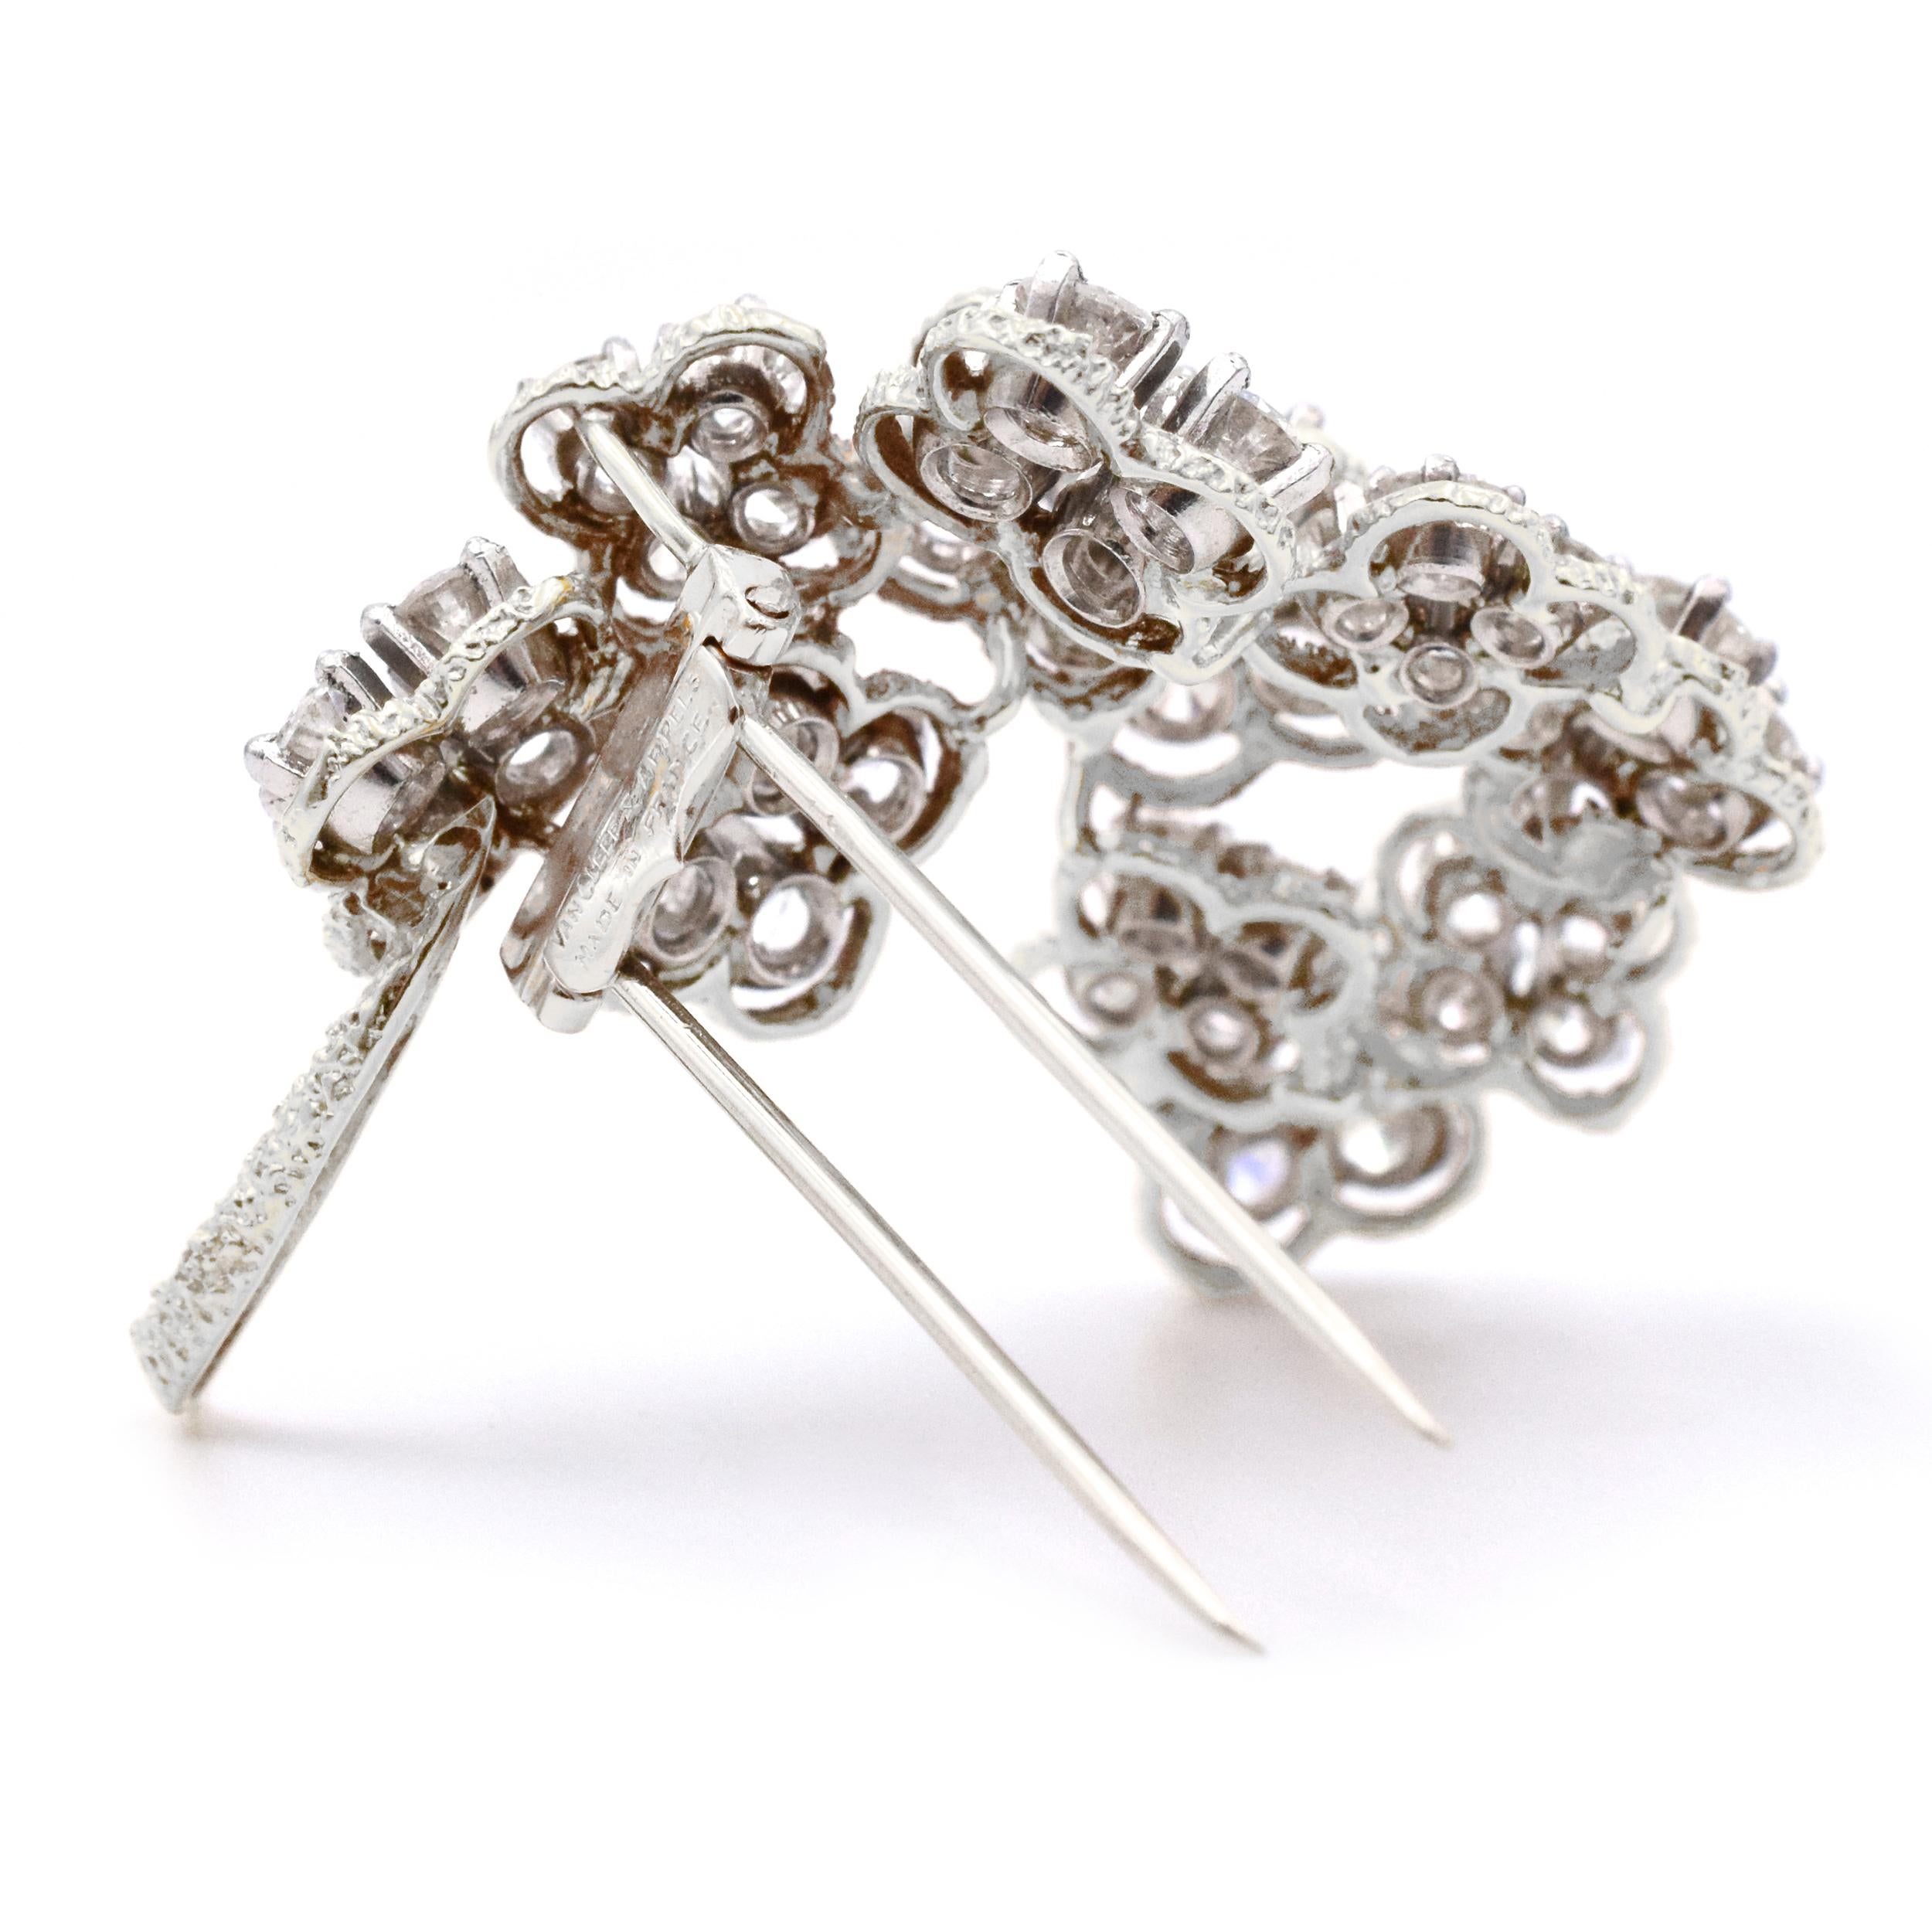 Van Cleef & Arpels Floral Diamond Brooch French In Excellent Condition For Sale In New York, NY